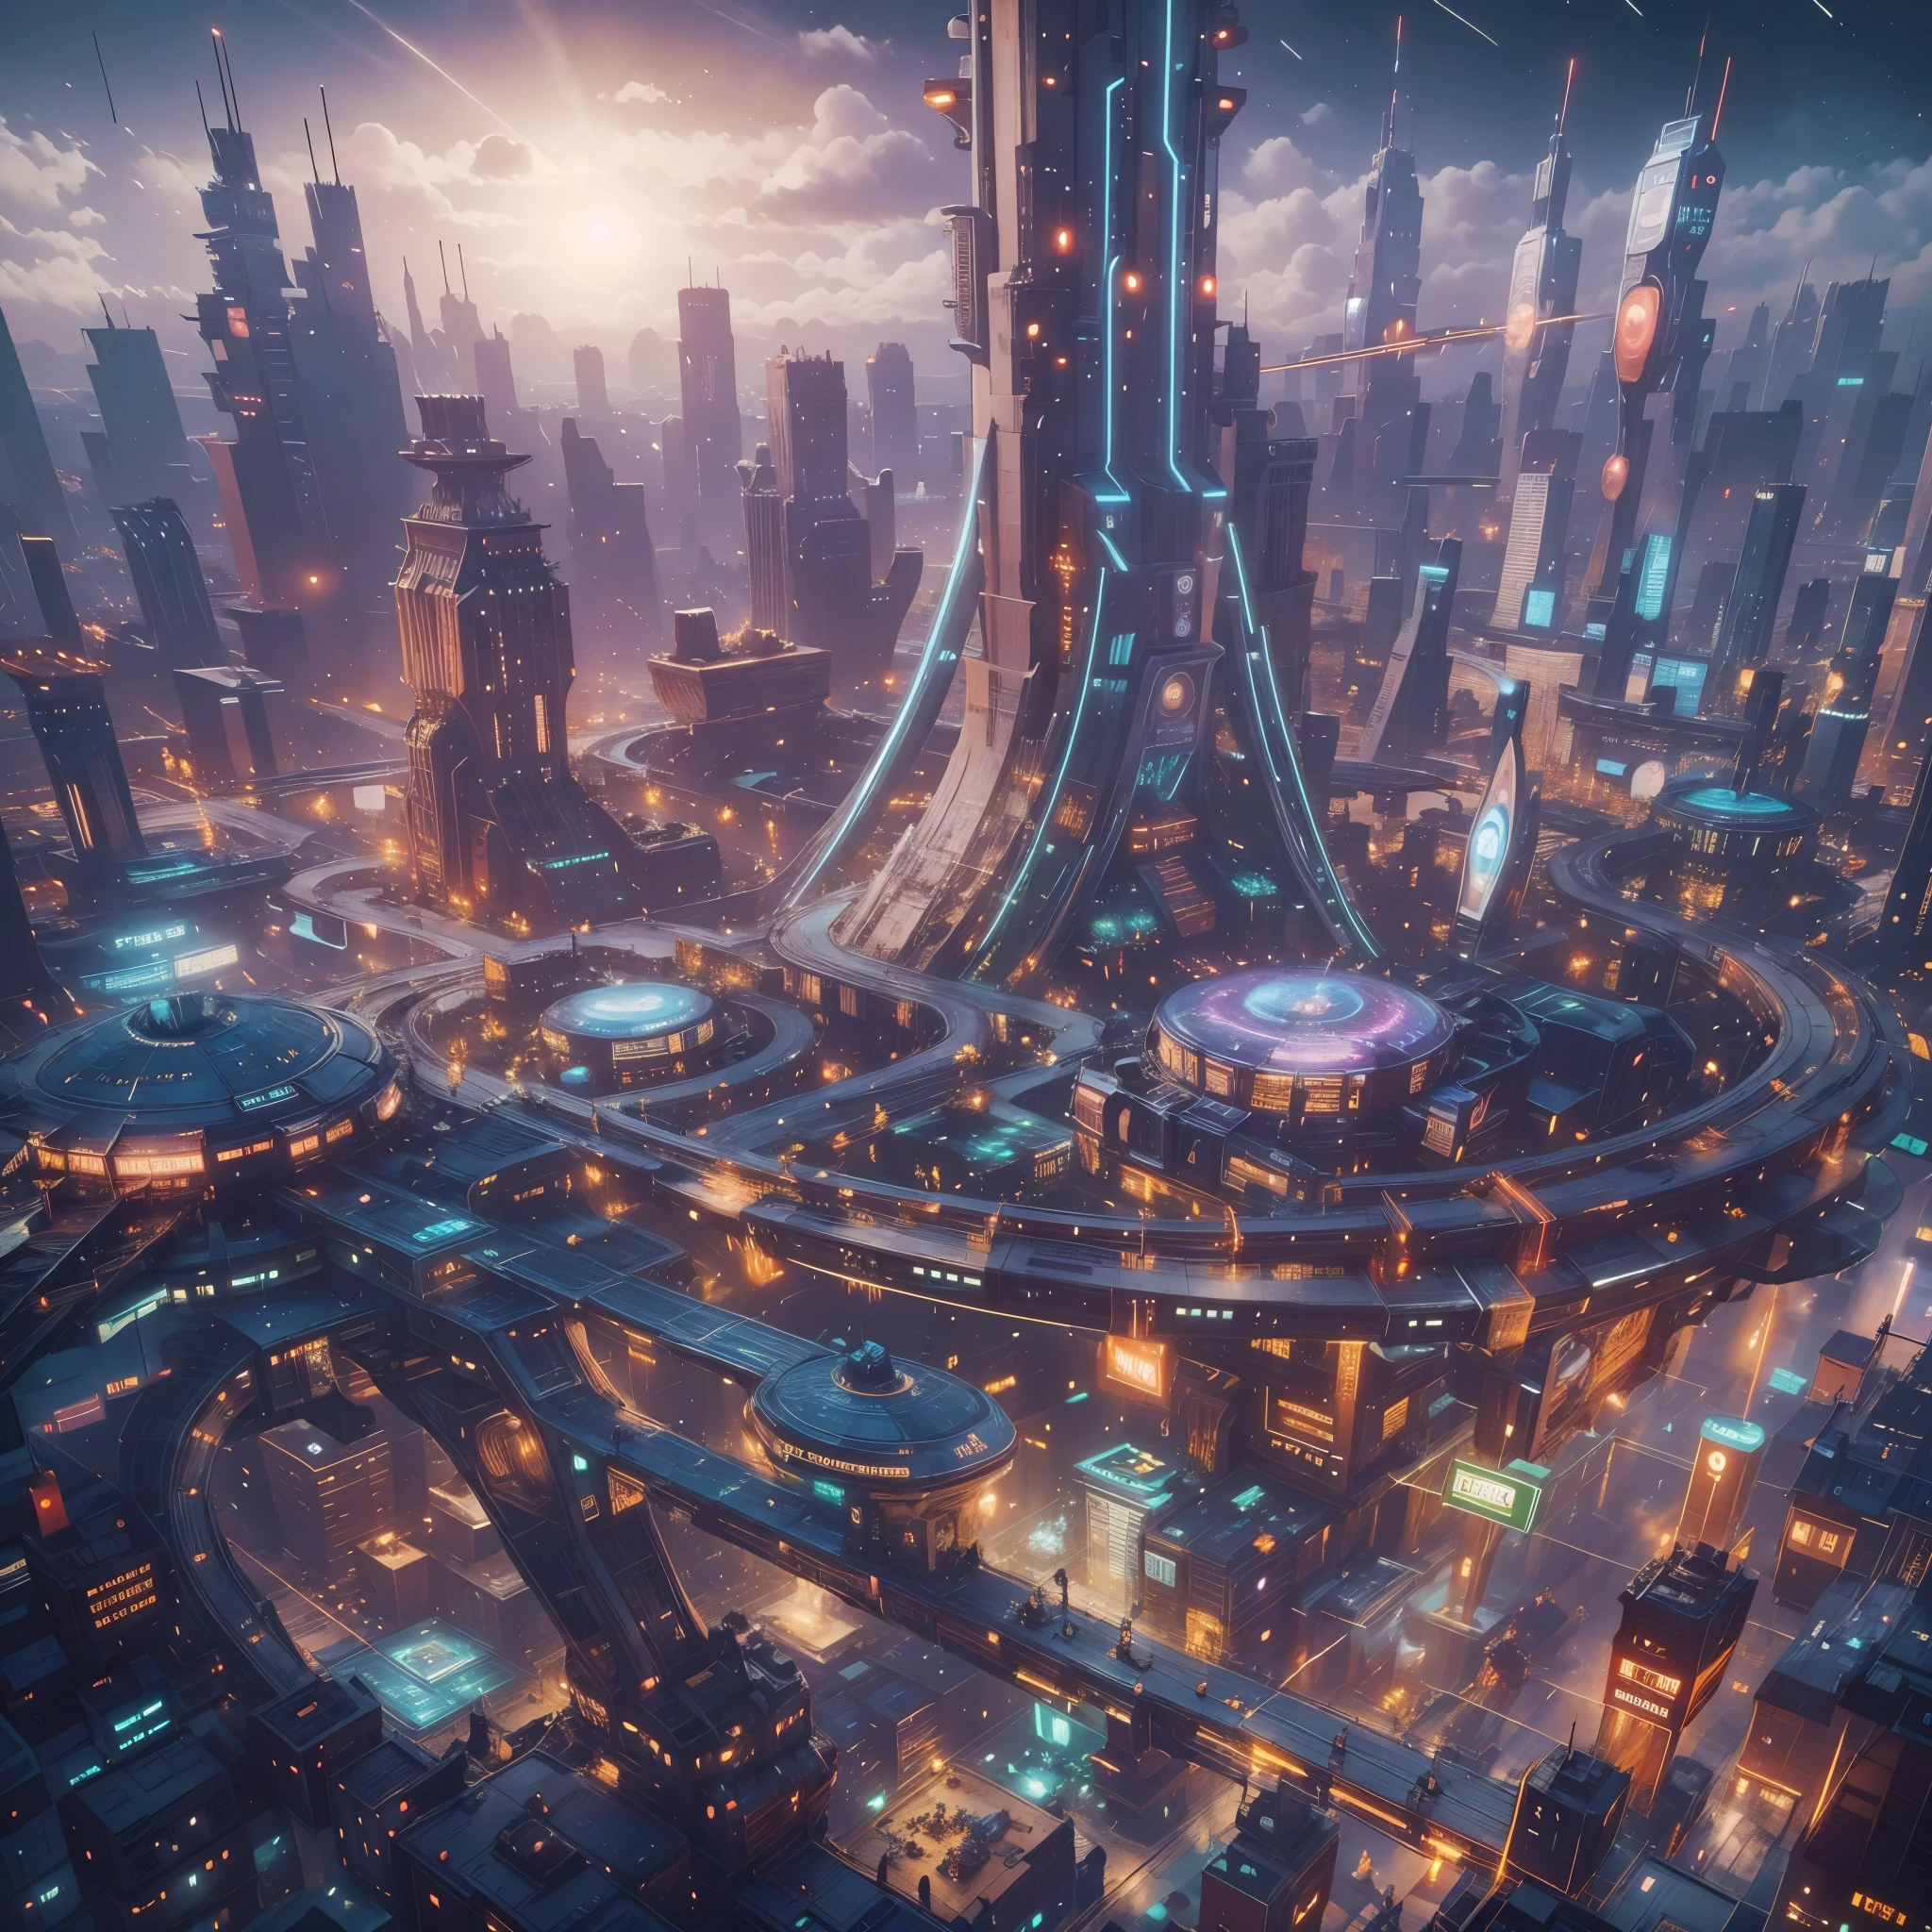 futuristic city、The theme park of the future，The amusement park of the future，entertainment city，floating in the universe、cyberpunk、Rows of skyscrapers、a space station、roller coaster，Ferris wheel，Attractions，top quality、​Masterpiece、Dream、Utopian、planet earth、Dream World、fantasy、𝓡𝓸𝓶𝓪𝓷𝓽𝓲𝓬、beautiful city、space city、A world far beyond human creation